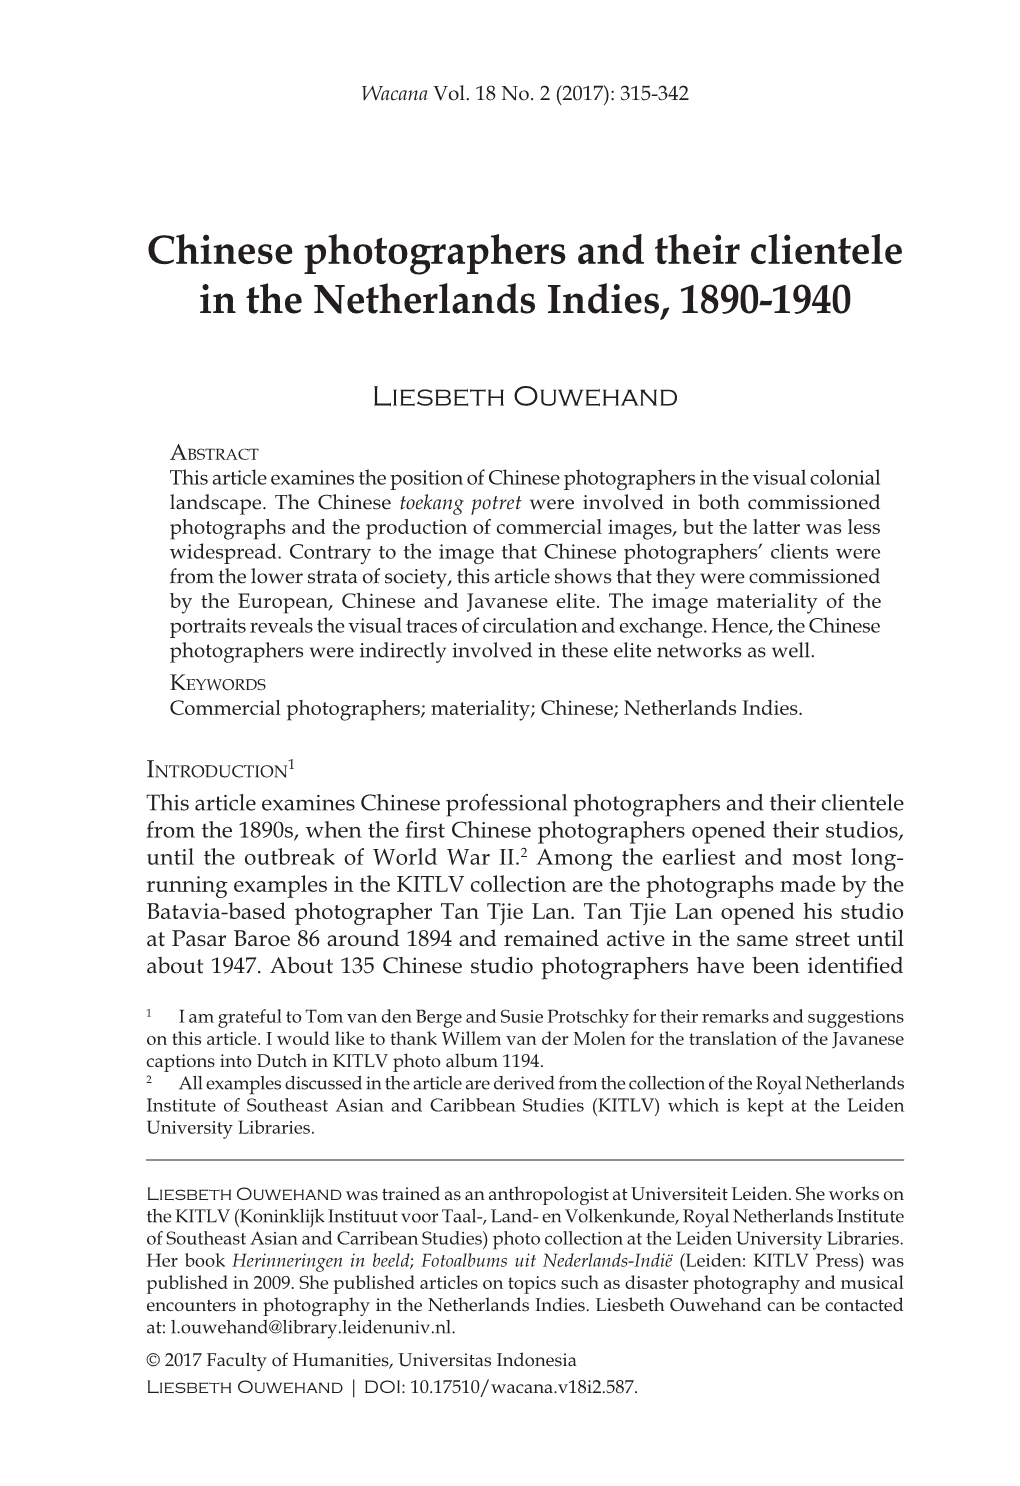 Chinese Photographers and Their Clientele in the Netherlands Indies, 1890-1940